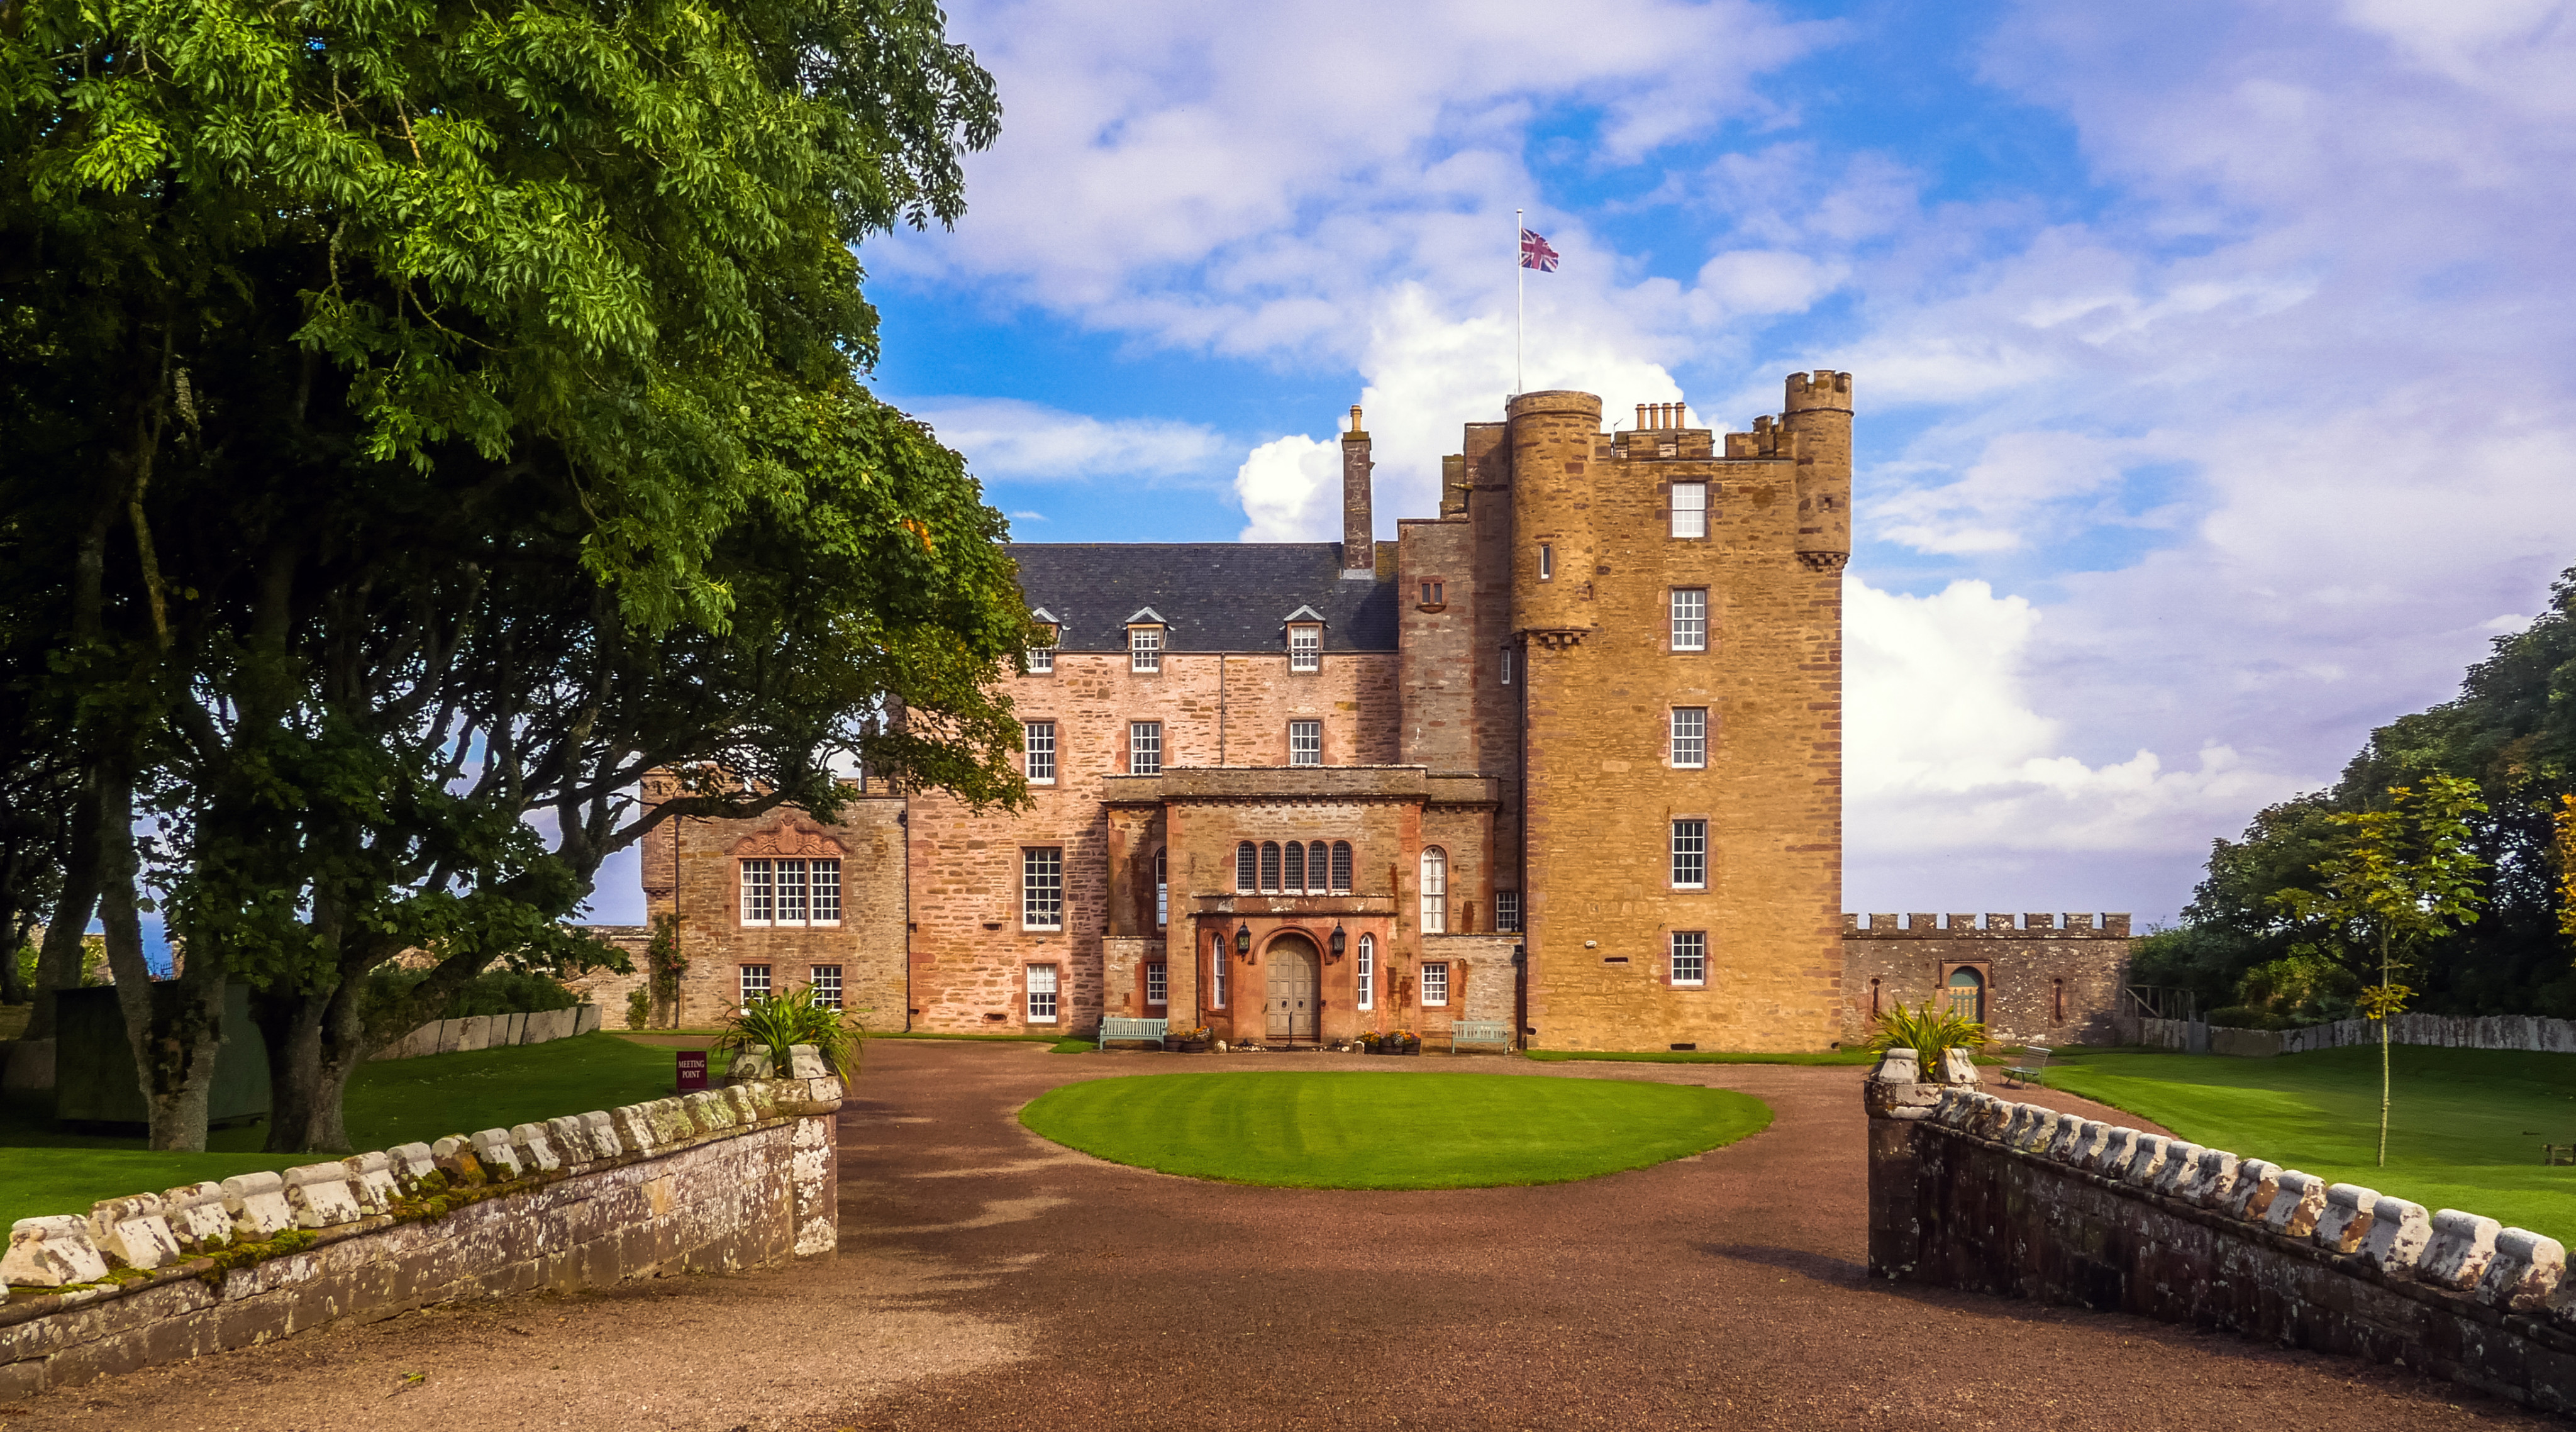 Britain’s King Charles plans to open up some royal properties to the public, but some are already available for rent, including places on royal estates such as the Castle of Mey (above) in the far north of Scotland. Photo: Shutterstock